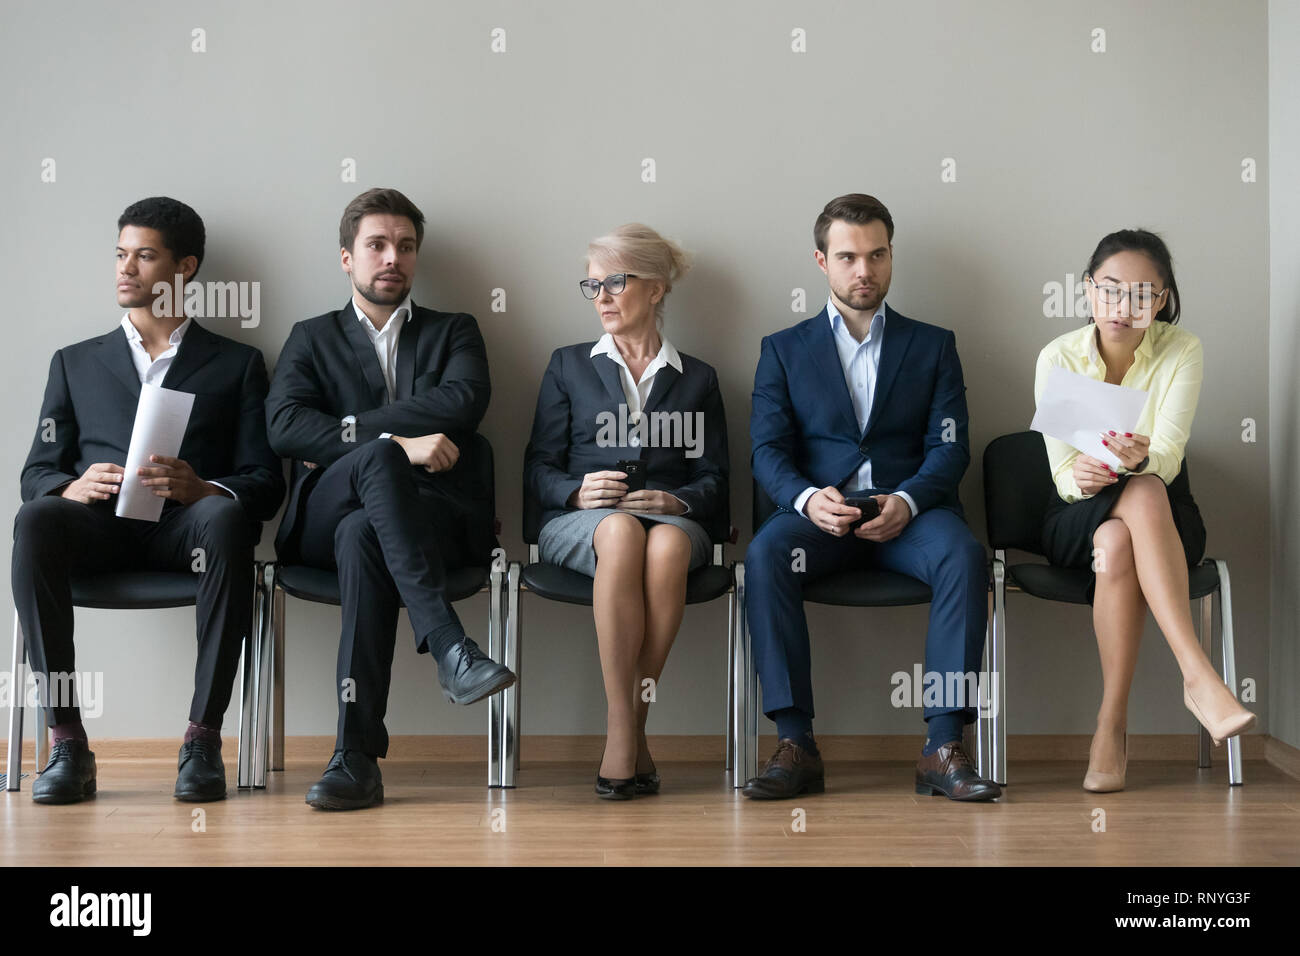 Diverse businesspeople applicants sitting in row waiting for job interview Stock Photo